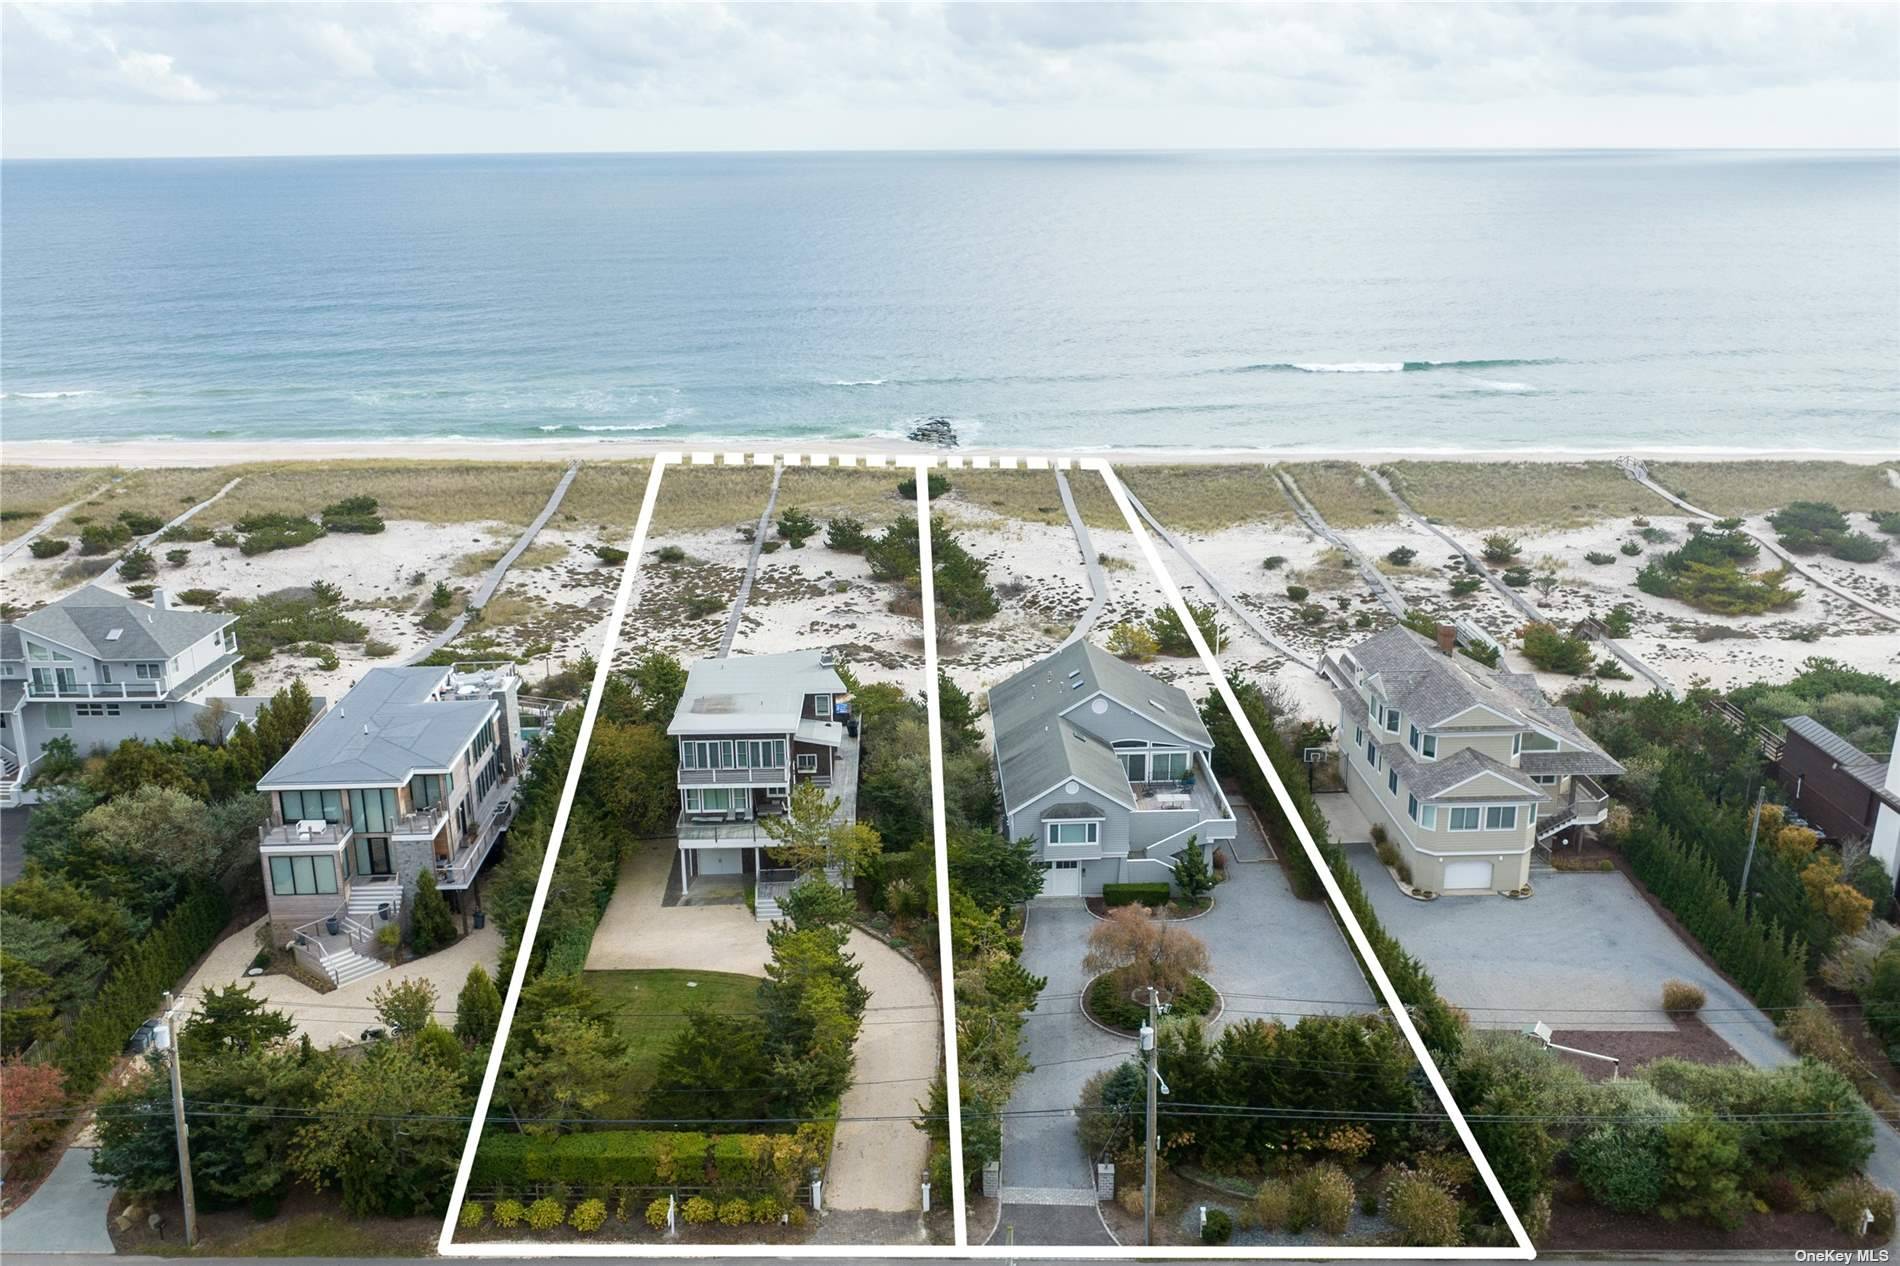 Two stunning oceanfront homes, 187 amp ; 191 Dune Road, both nestled in the prestigious Jetty Protected neighborhood of Westhampton Beach.